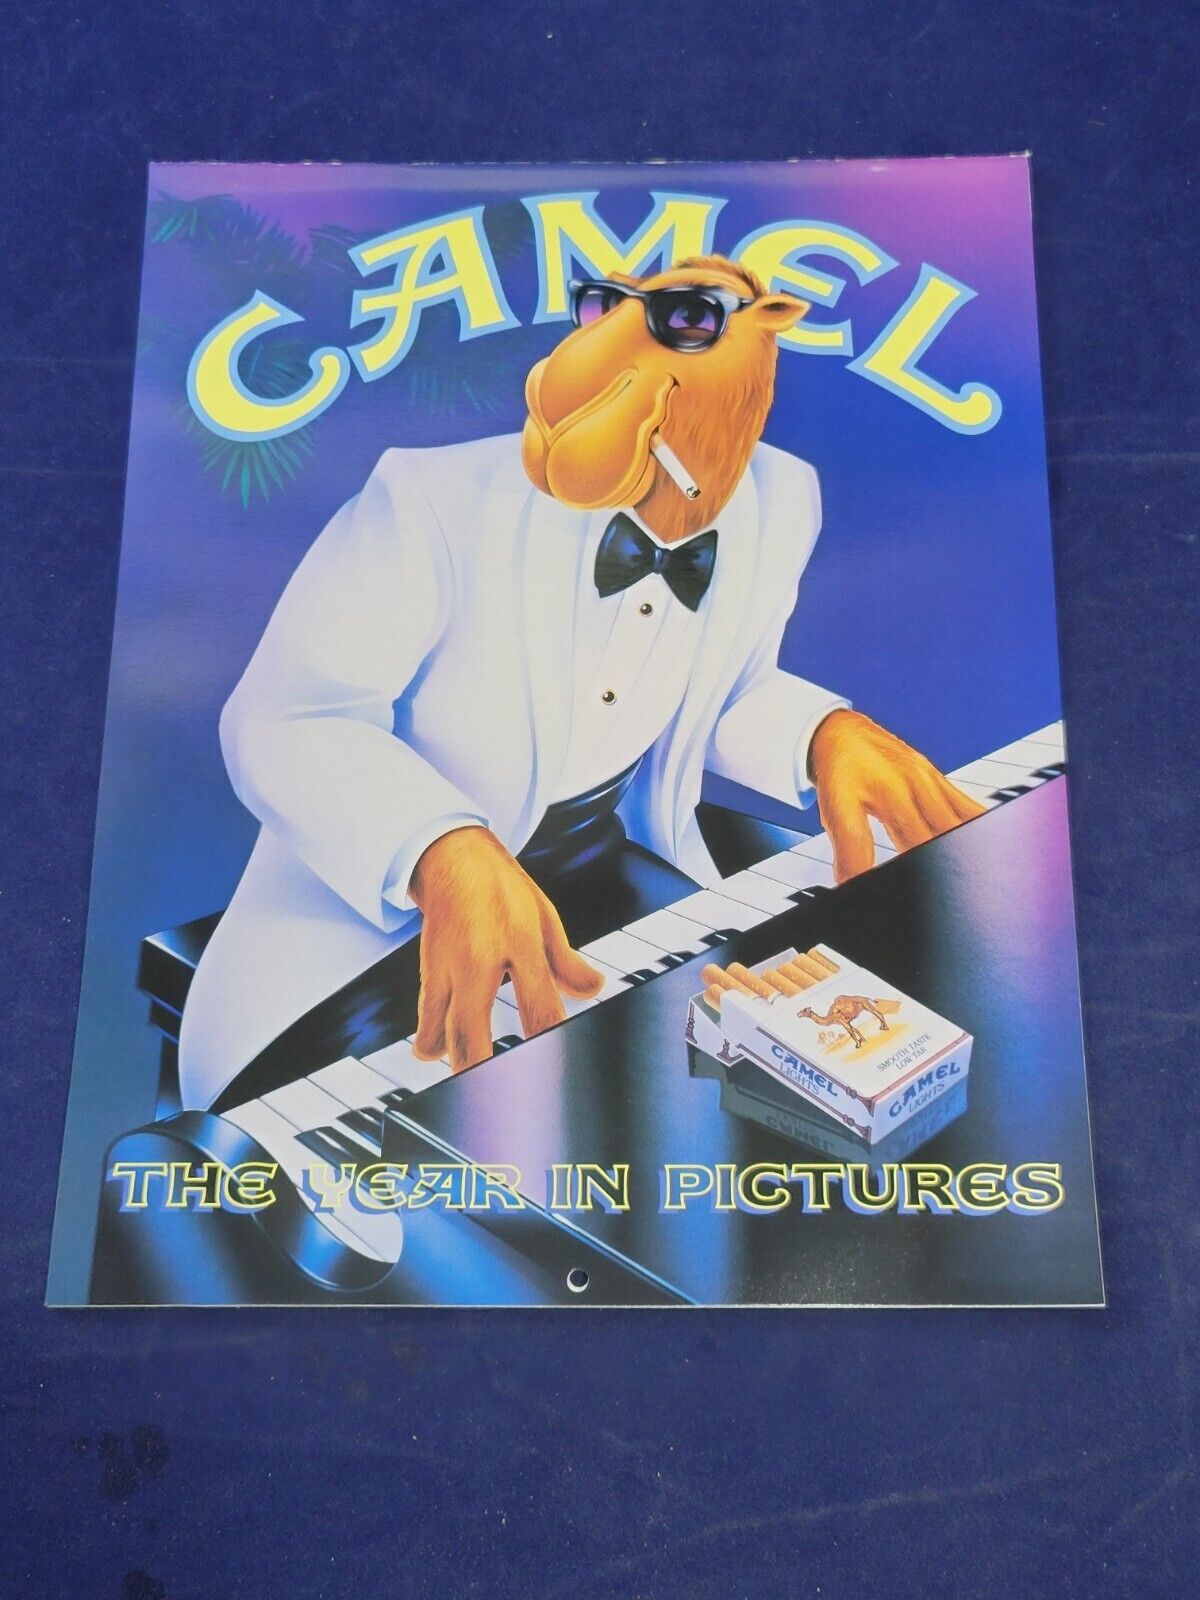 Vintage 1992 Camel Joe Calendar The Year In Pictures, Boxed For 30 Years